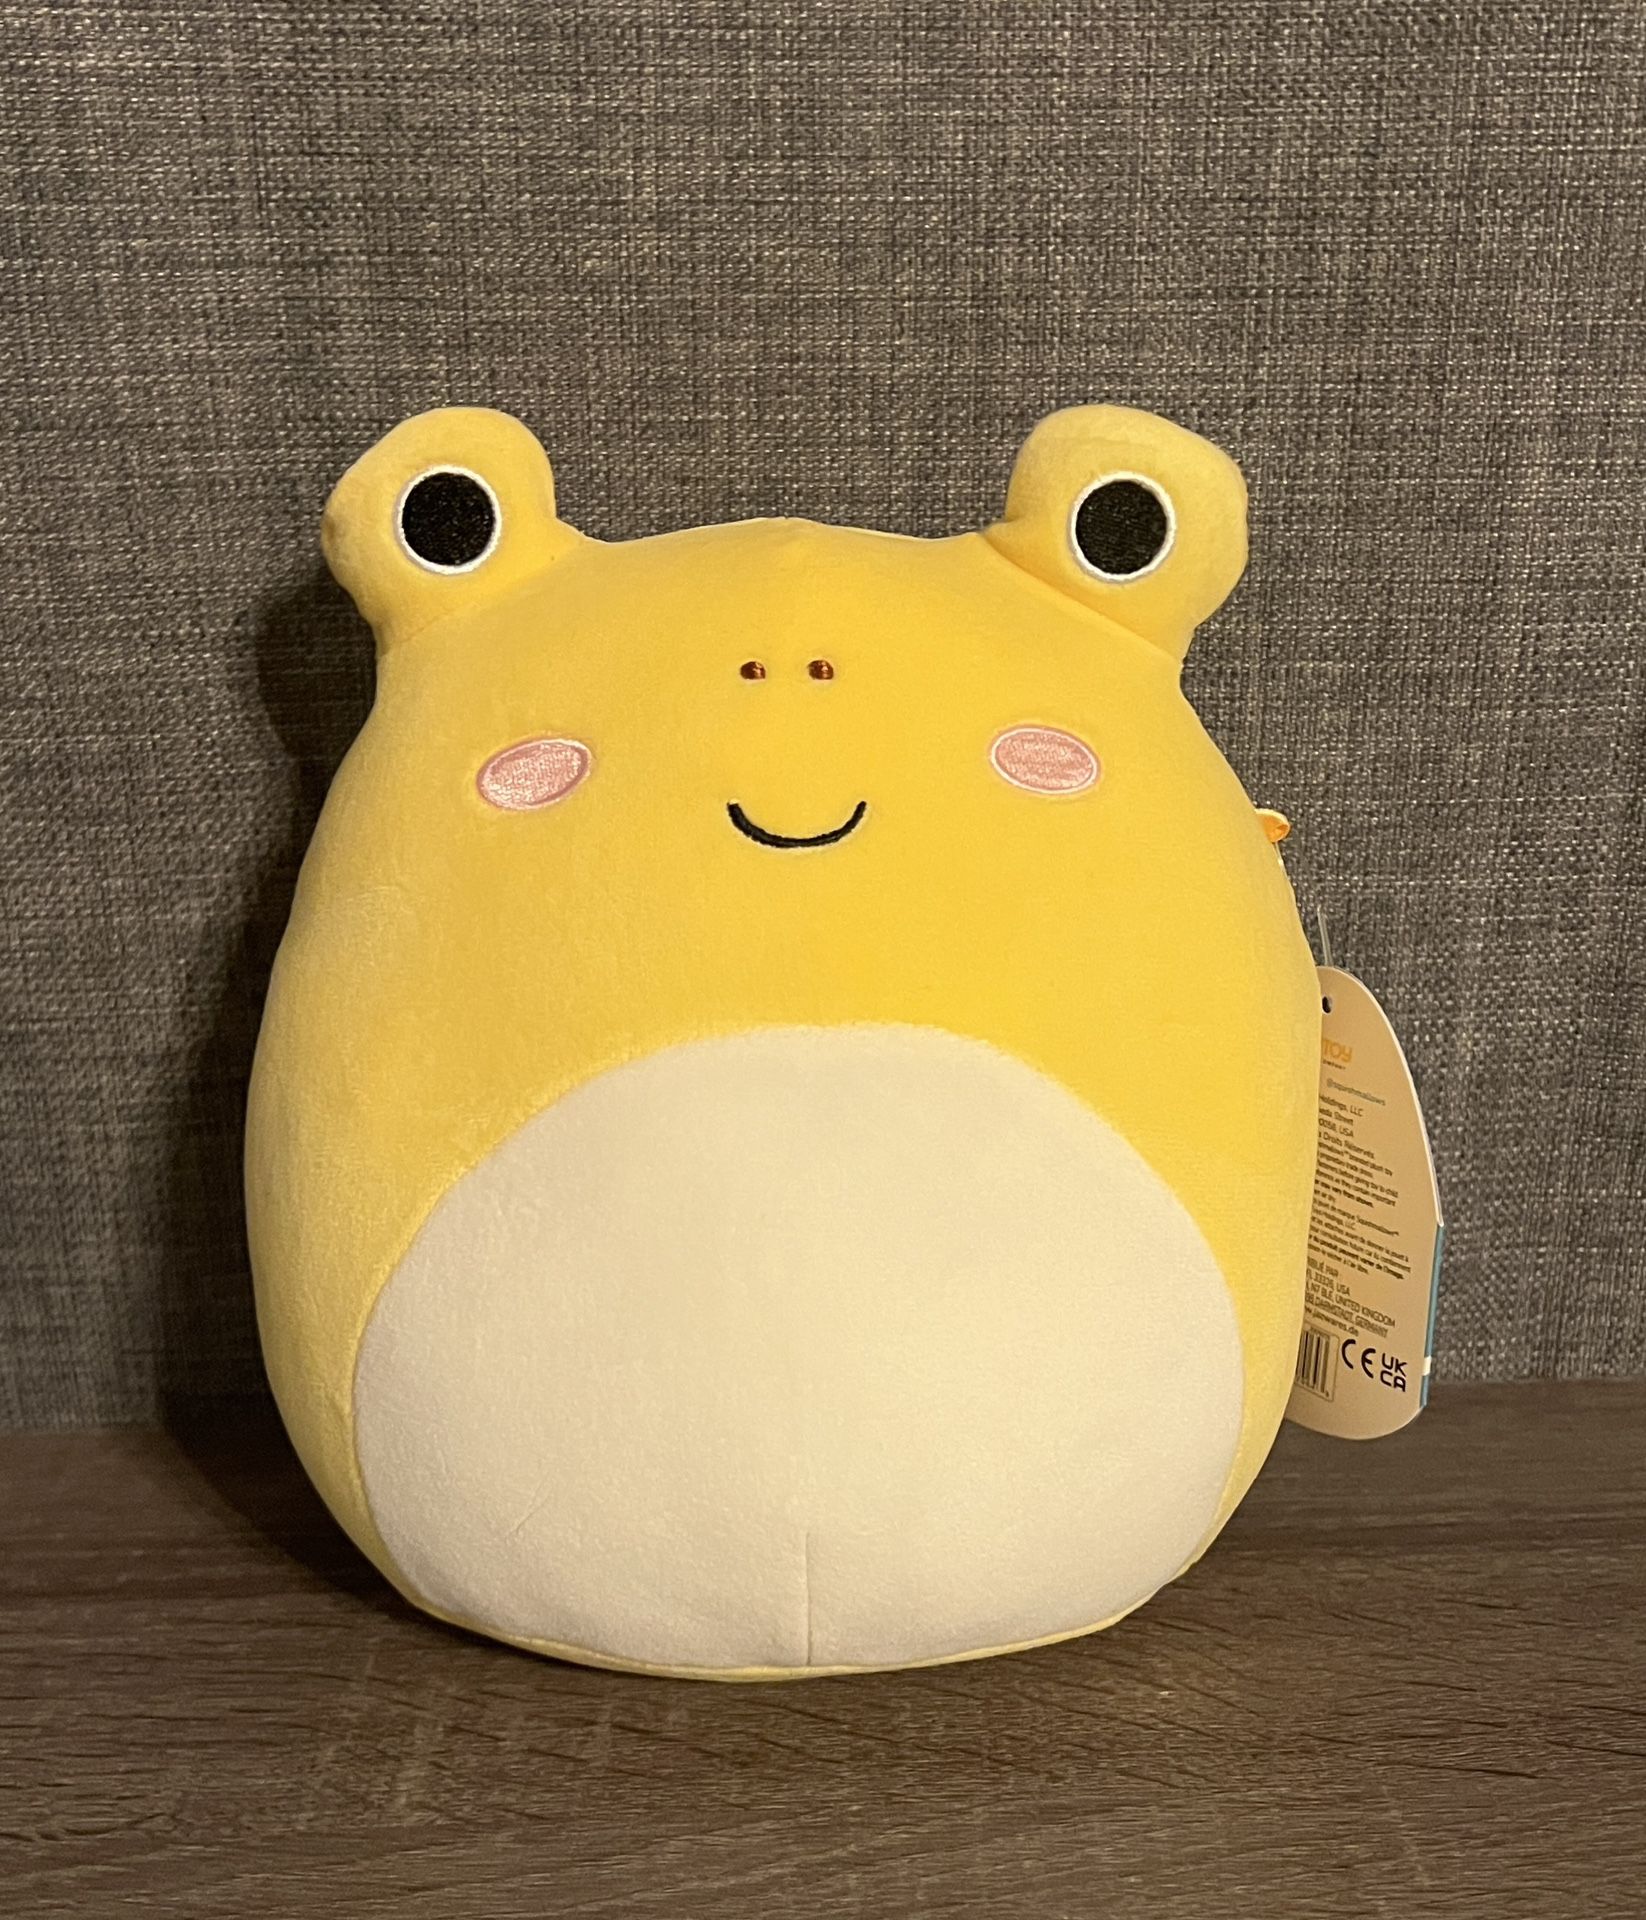 Leigh The Frog 8” Squishmallow for Sale in Glendale, AZ - OfferUp